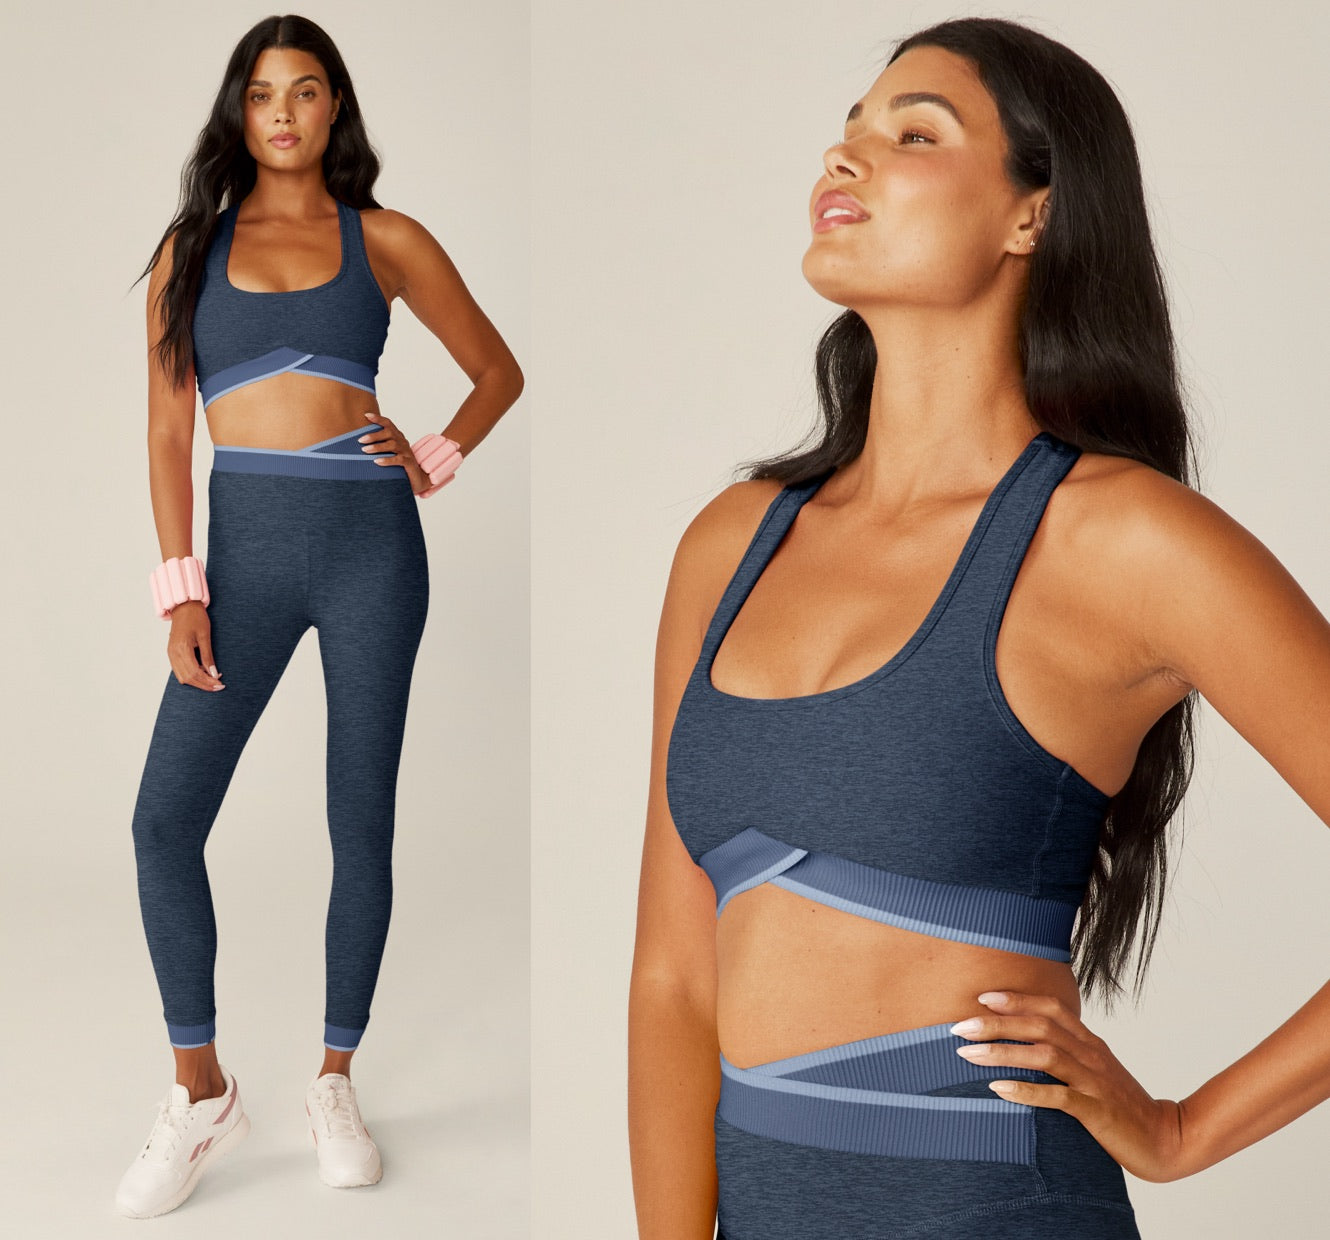 model is wearing a blue bra top with a crossover band and blue high-waisted midi leggings with outline detailing along the waistband and ankles.  